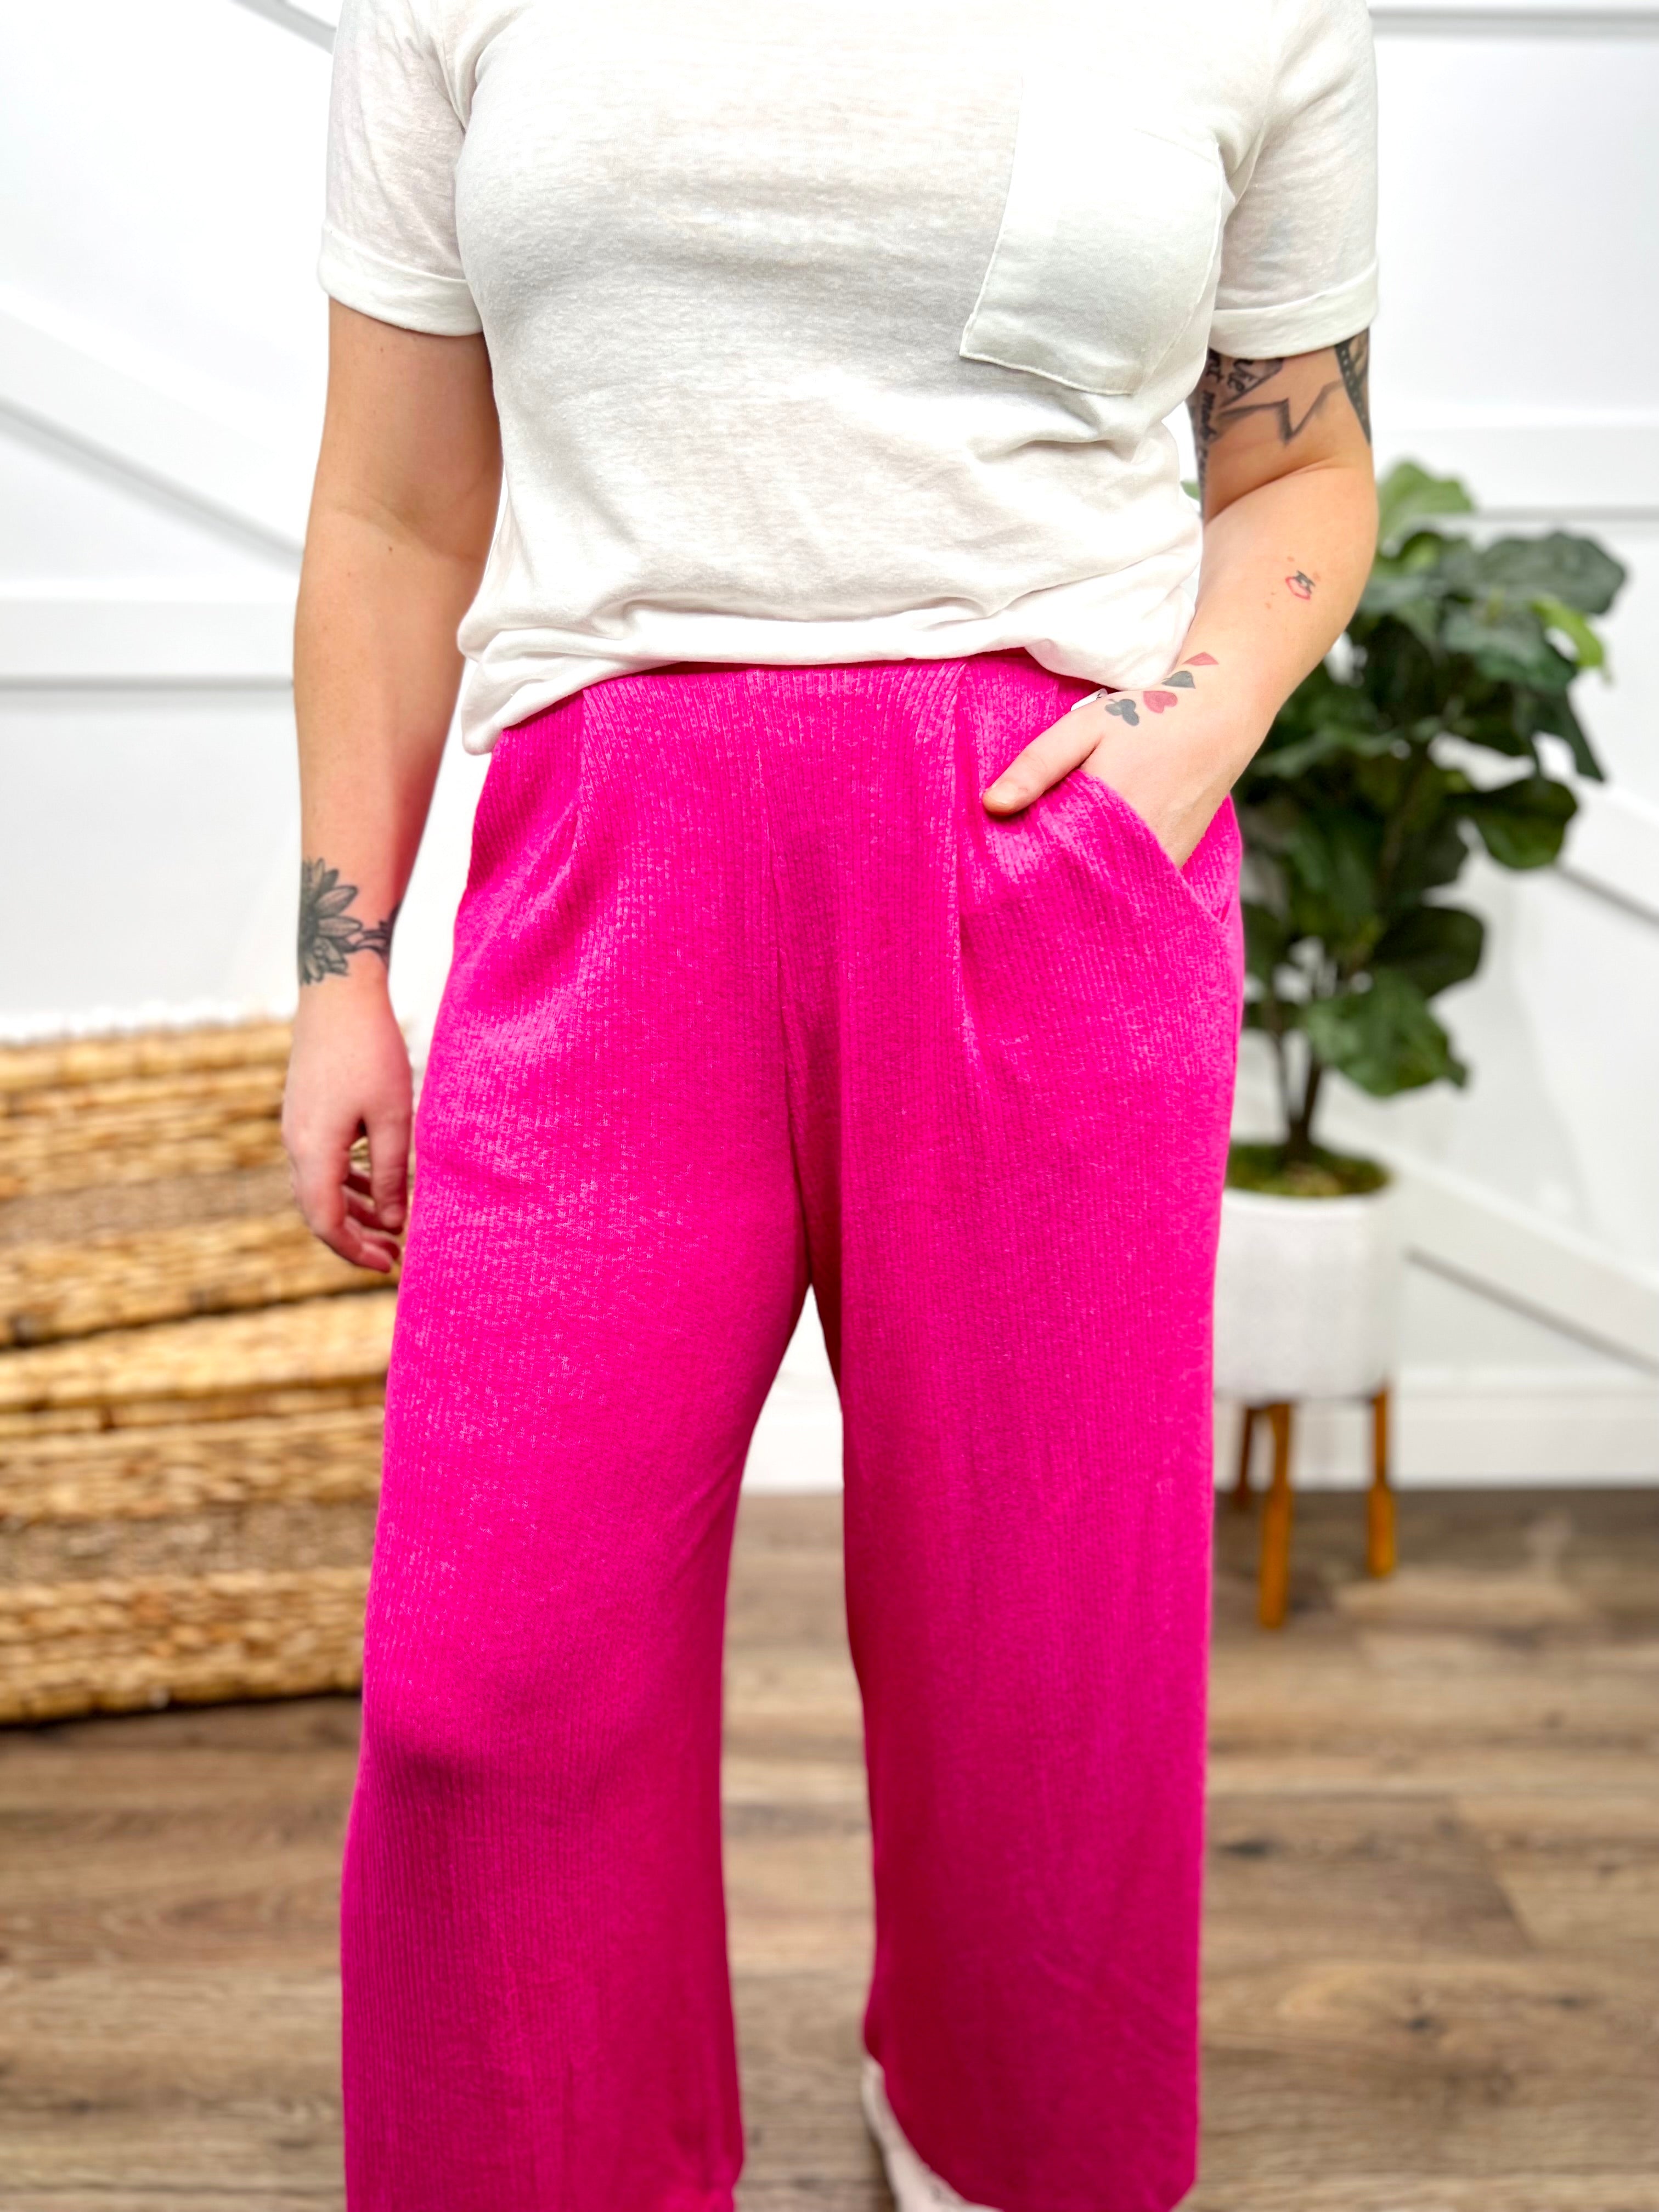 RESTOCK: Cozy Era Bottoms-150 PANTS-P.S. Kate-Heathered Boho Boutique, Women's Fashion and Accessories in Palmetto, FL